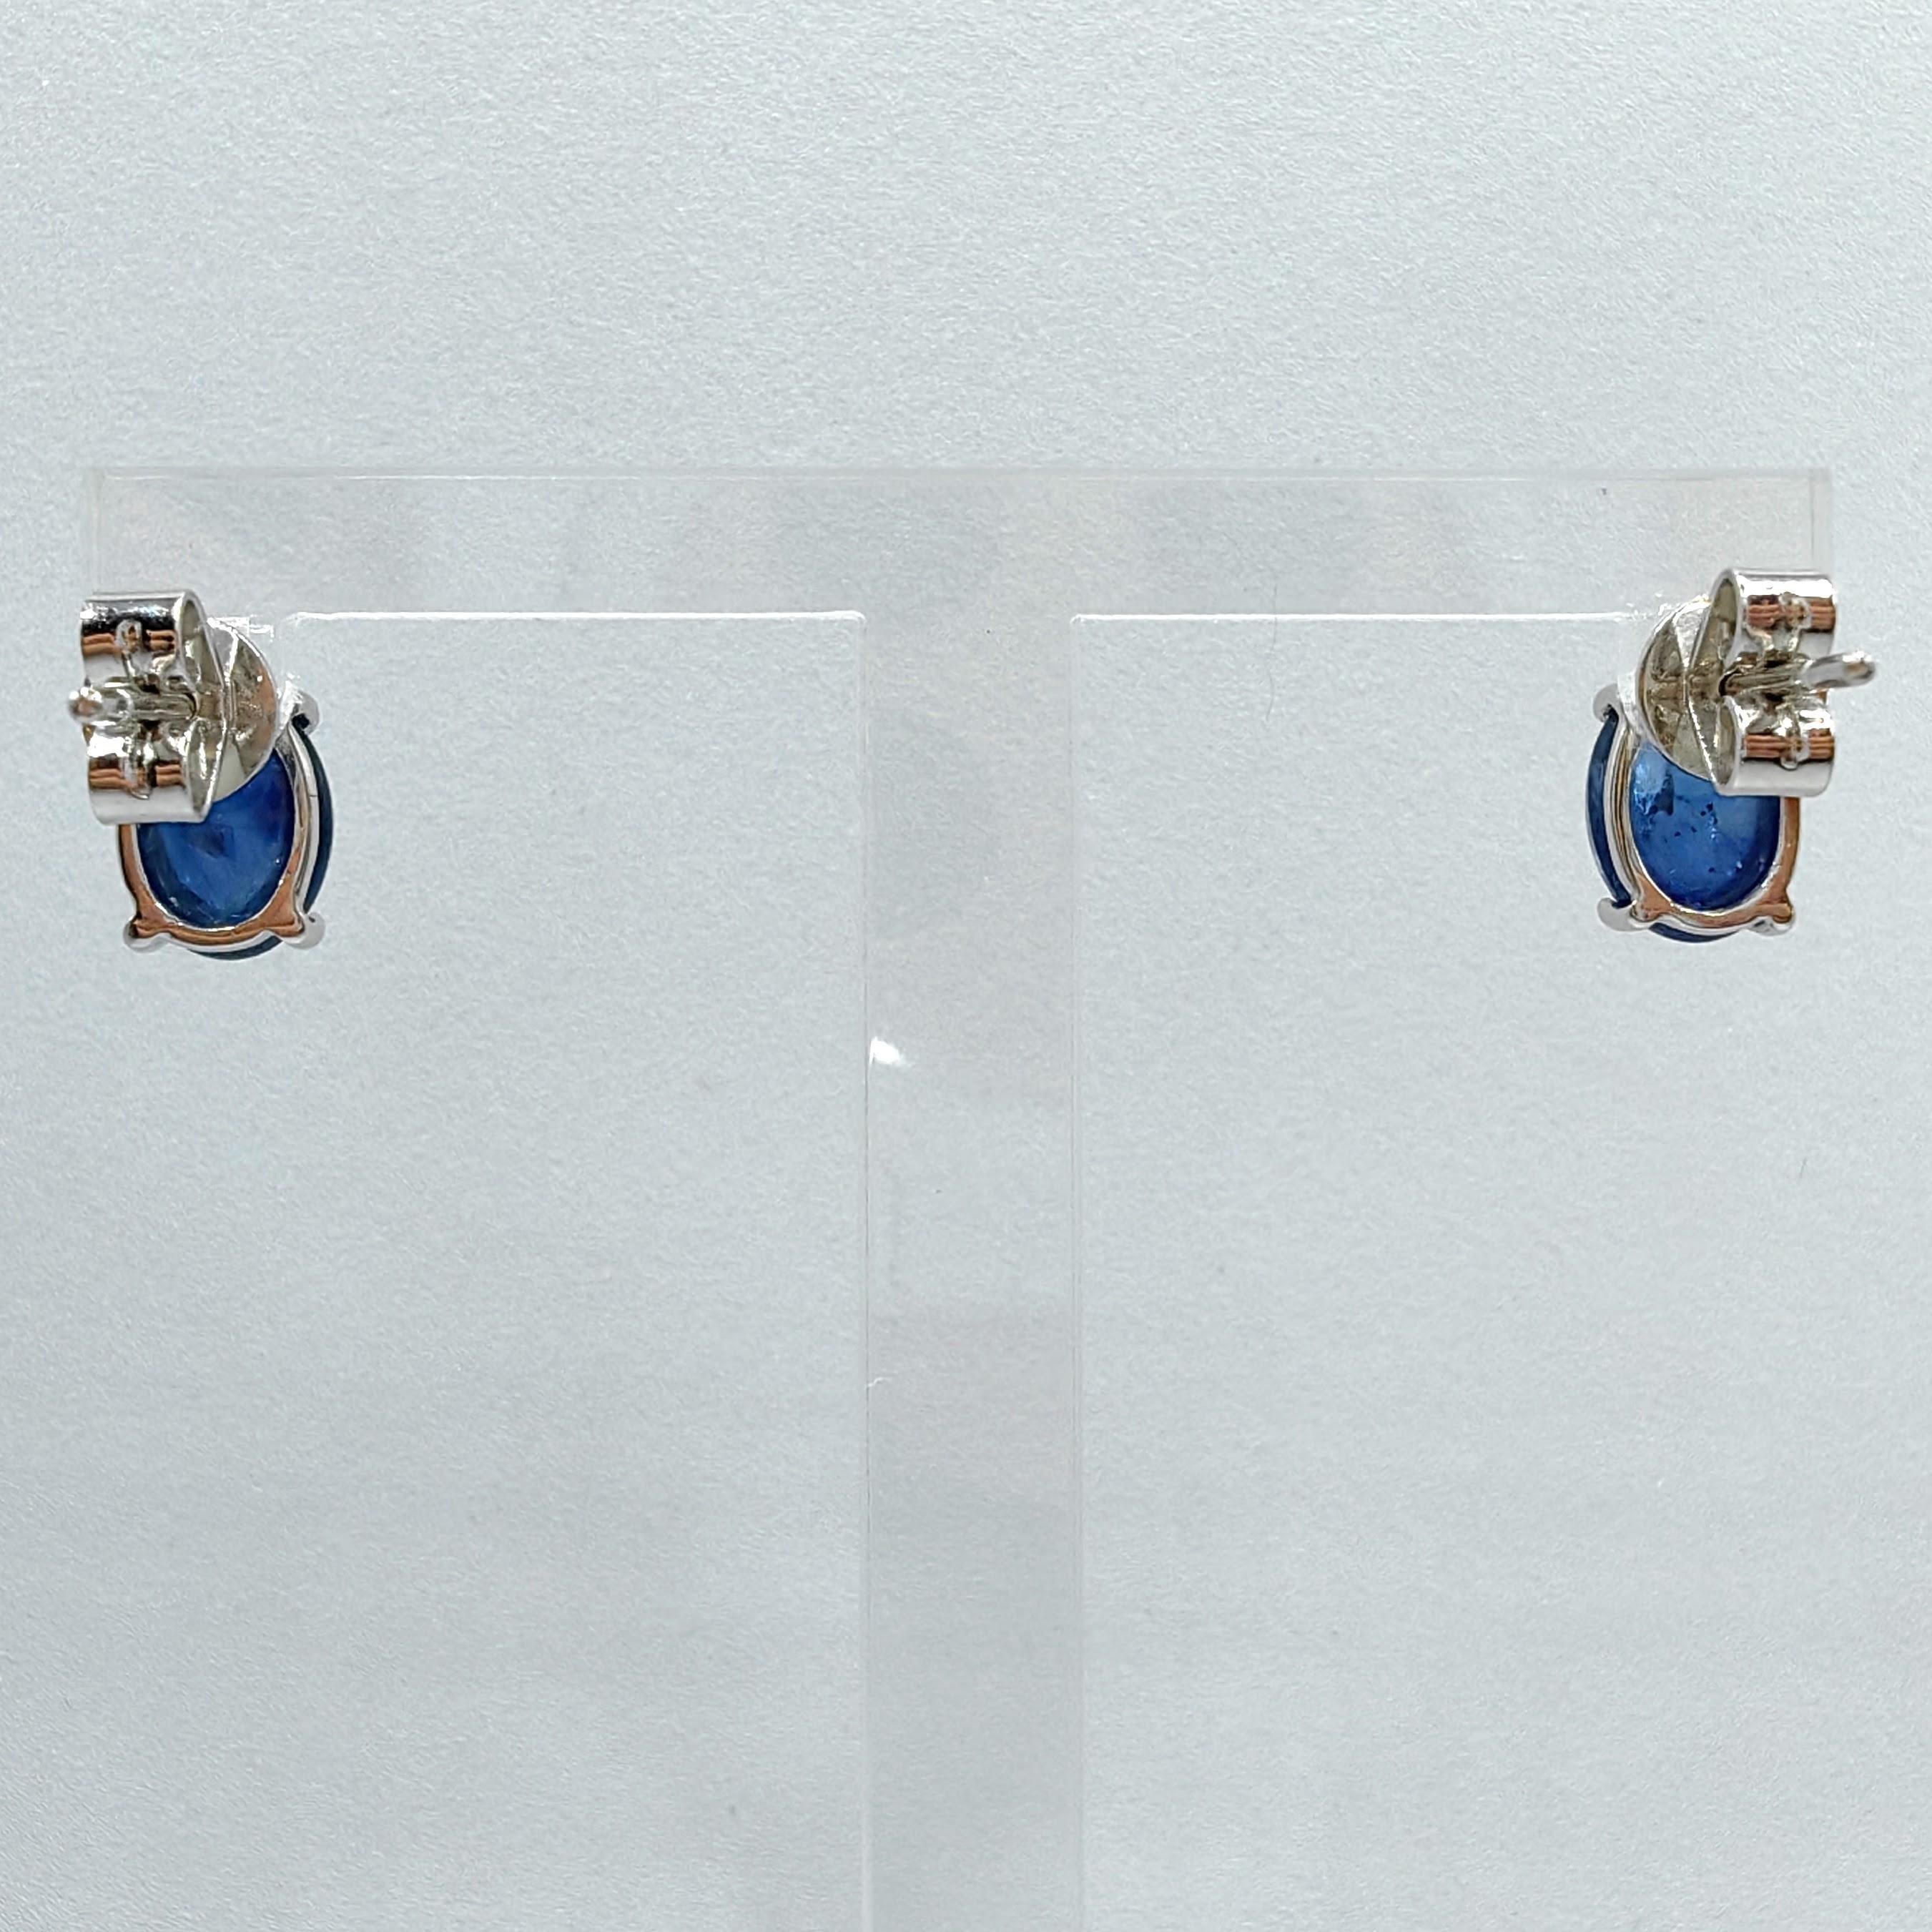 Matched 4.24 Carat 8x6mm Cabochon Blue Sapphire Stud Earrings in 18K White Gold 3